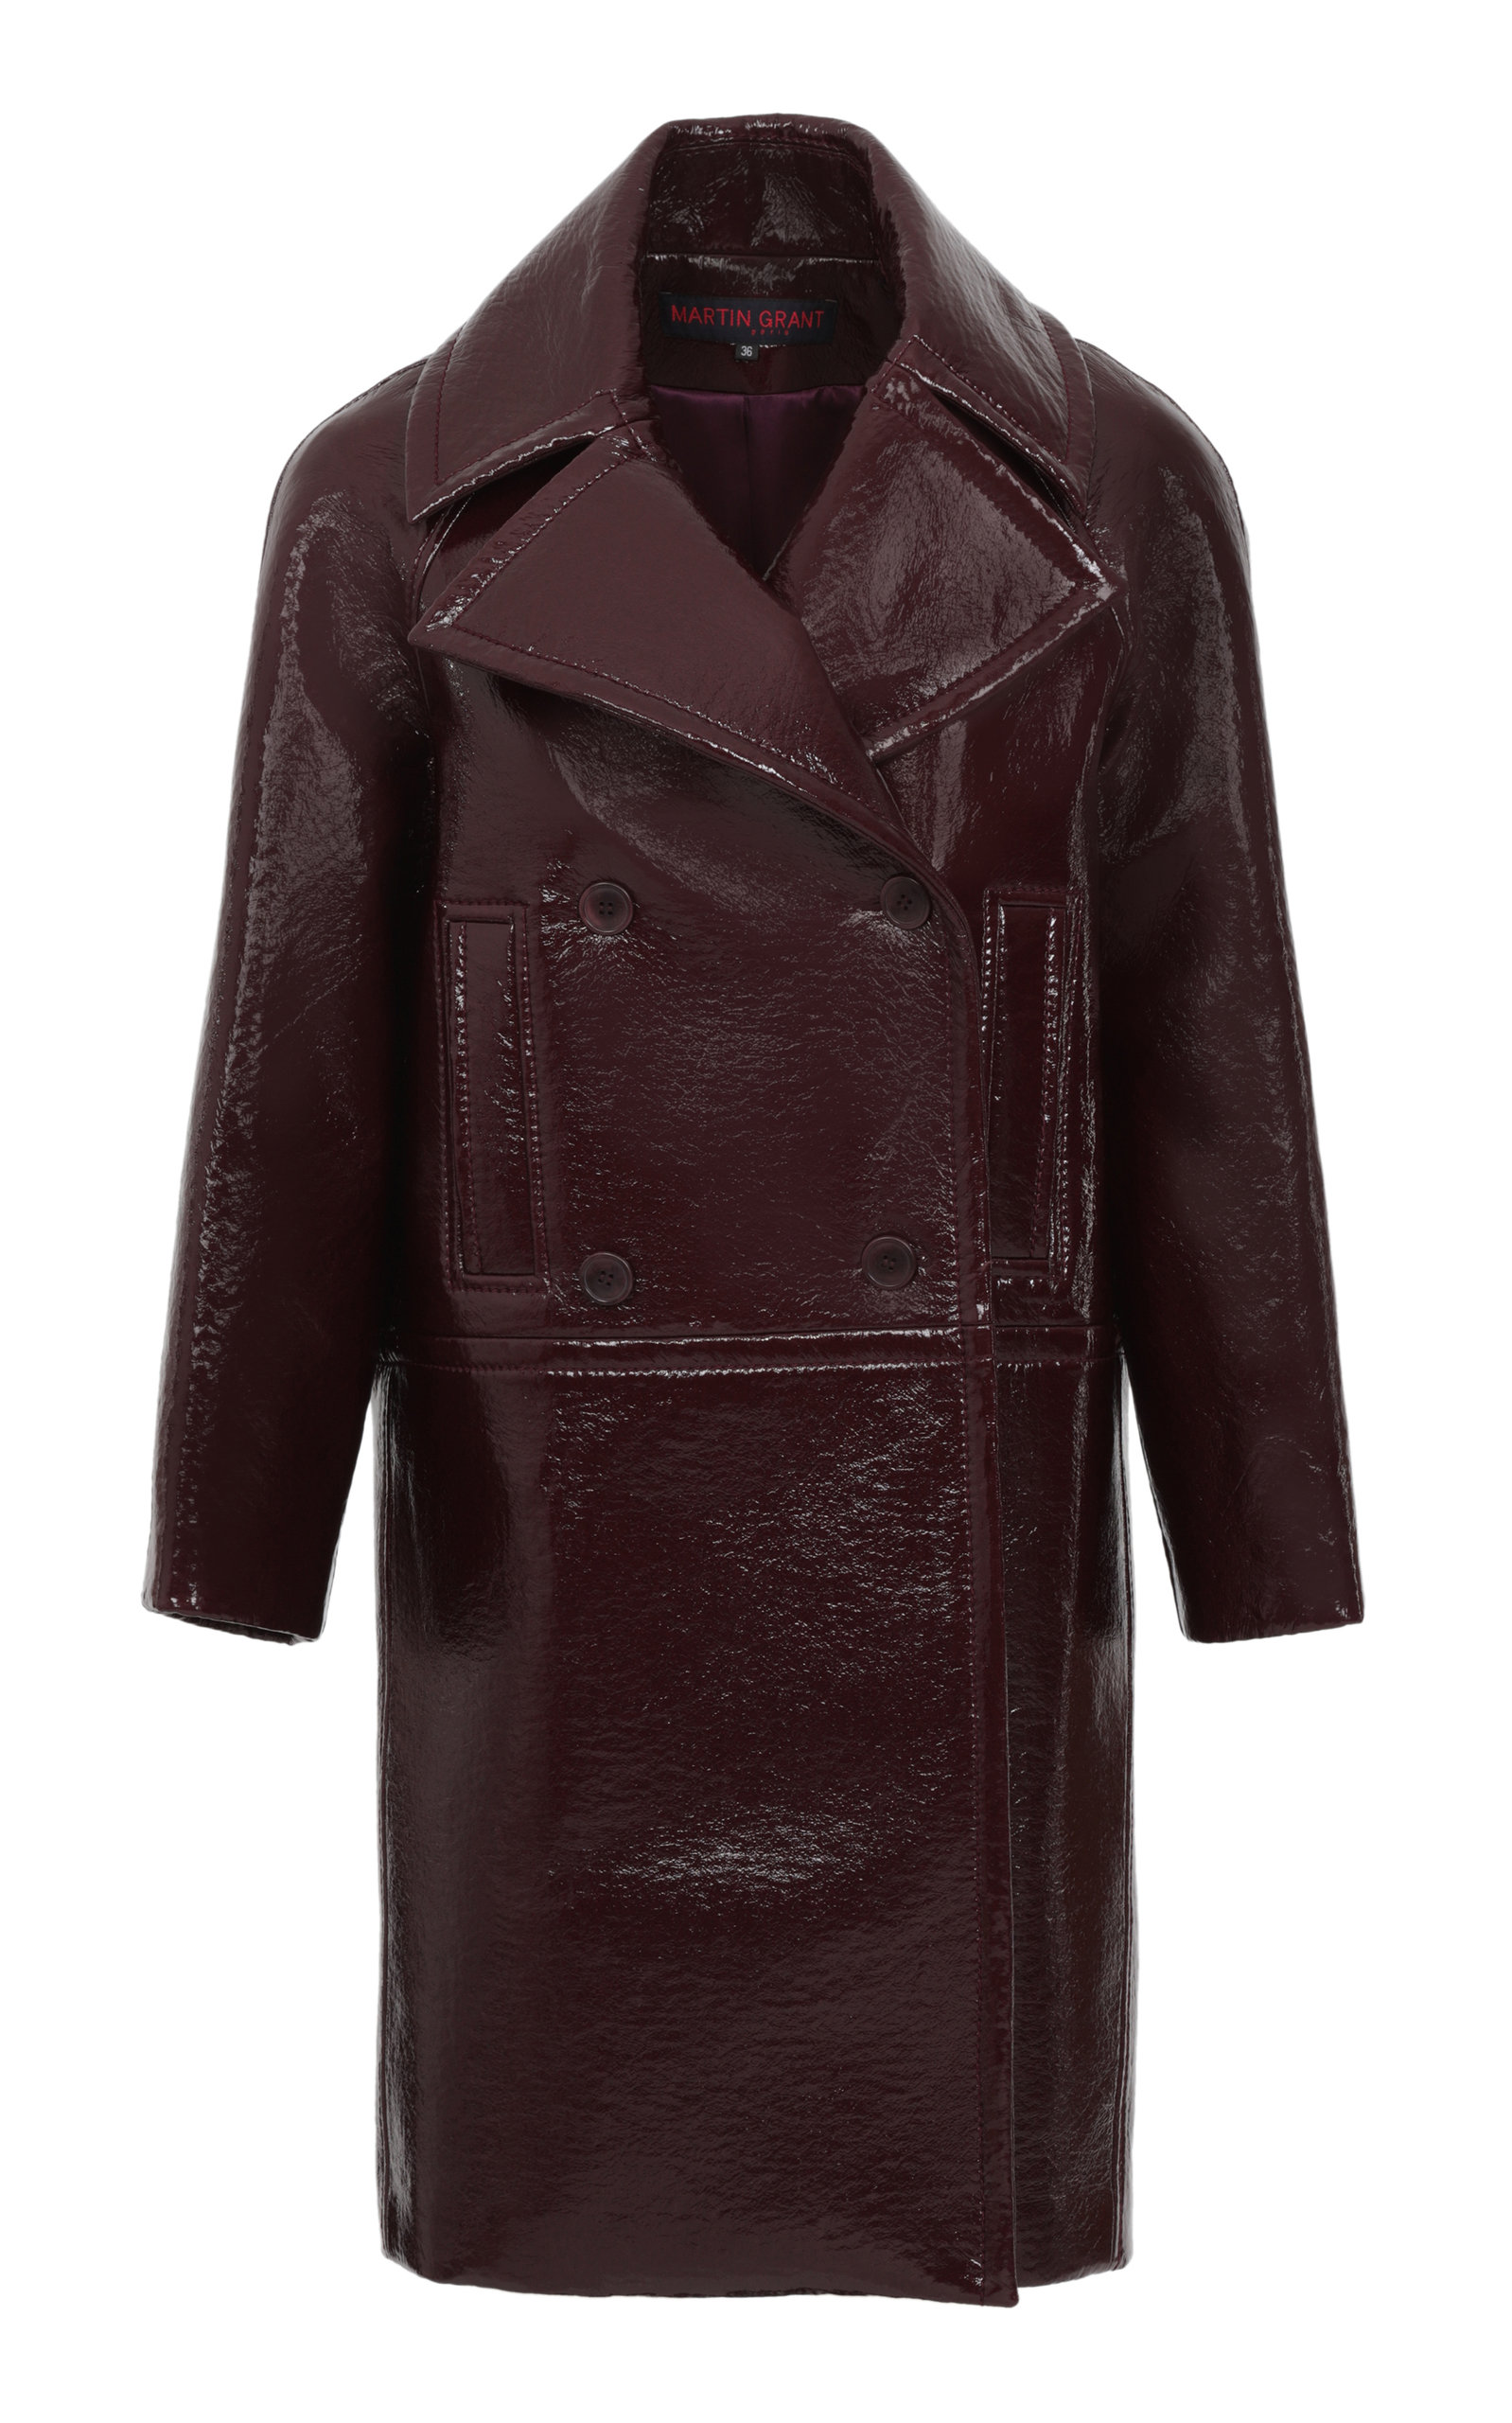 Martin Grant Women's Double-Breasted Lacquered Pea Coat